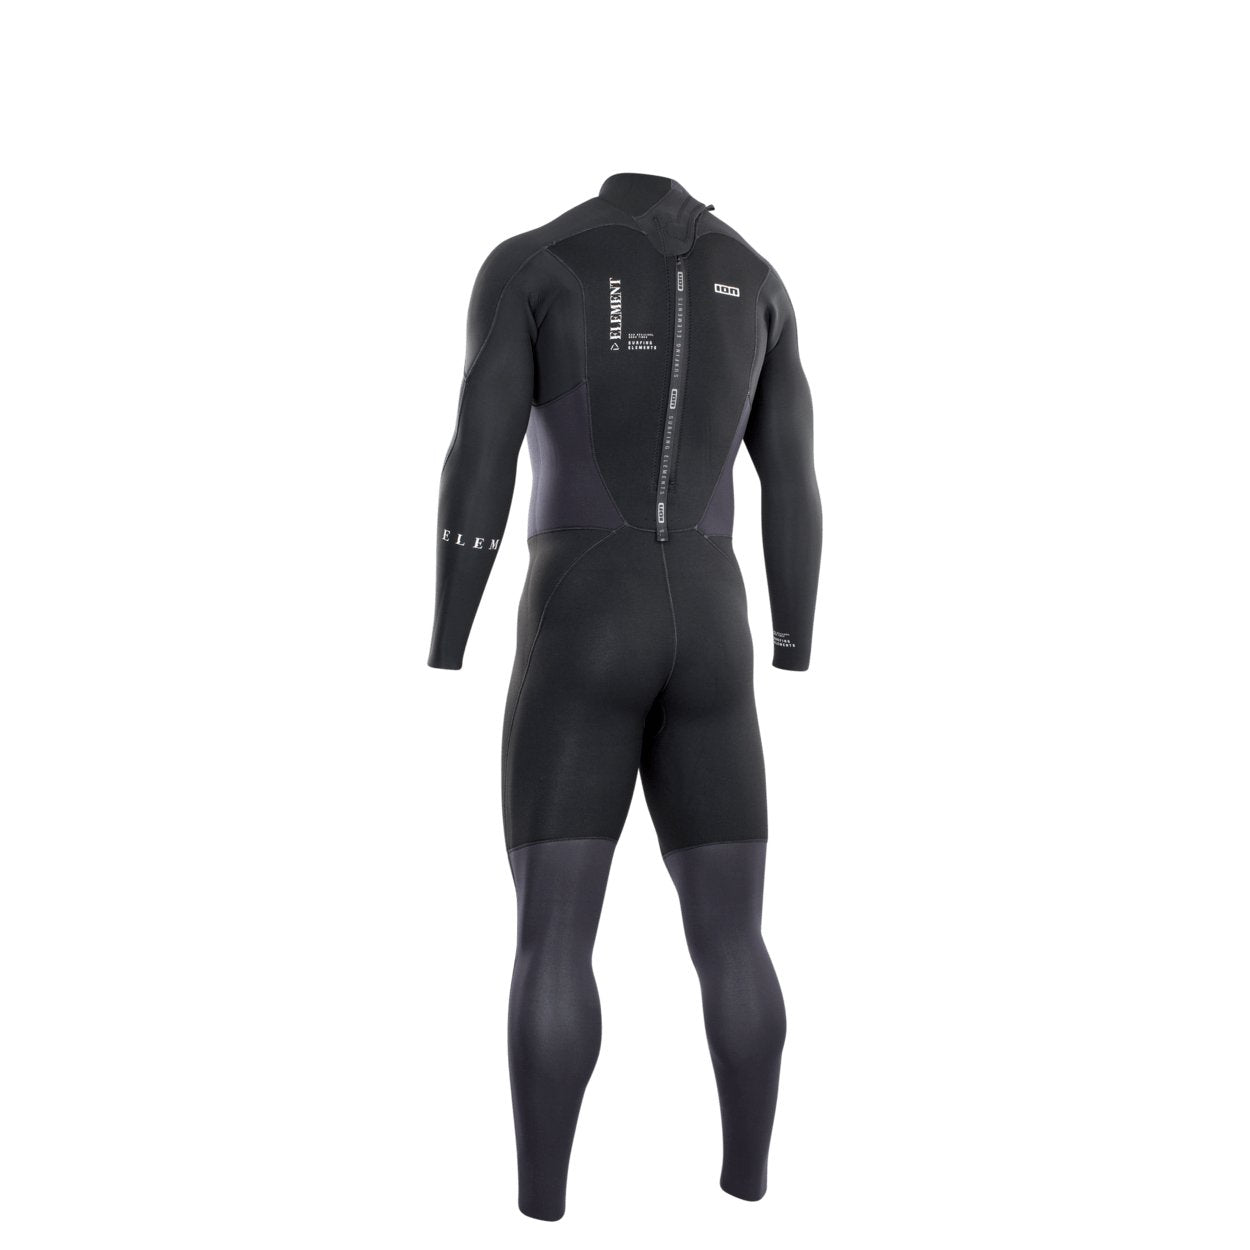 ION Men Wetsuit Element 3/2 Back Zip 2022 - Worthing Watersports - 9008415949151 - Wetsuits - ION Water